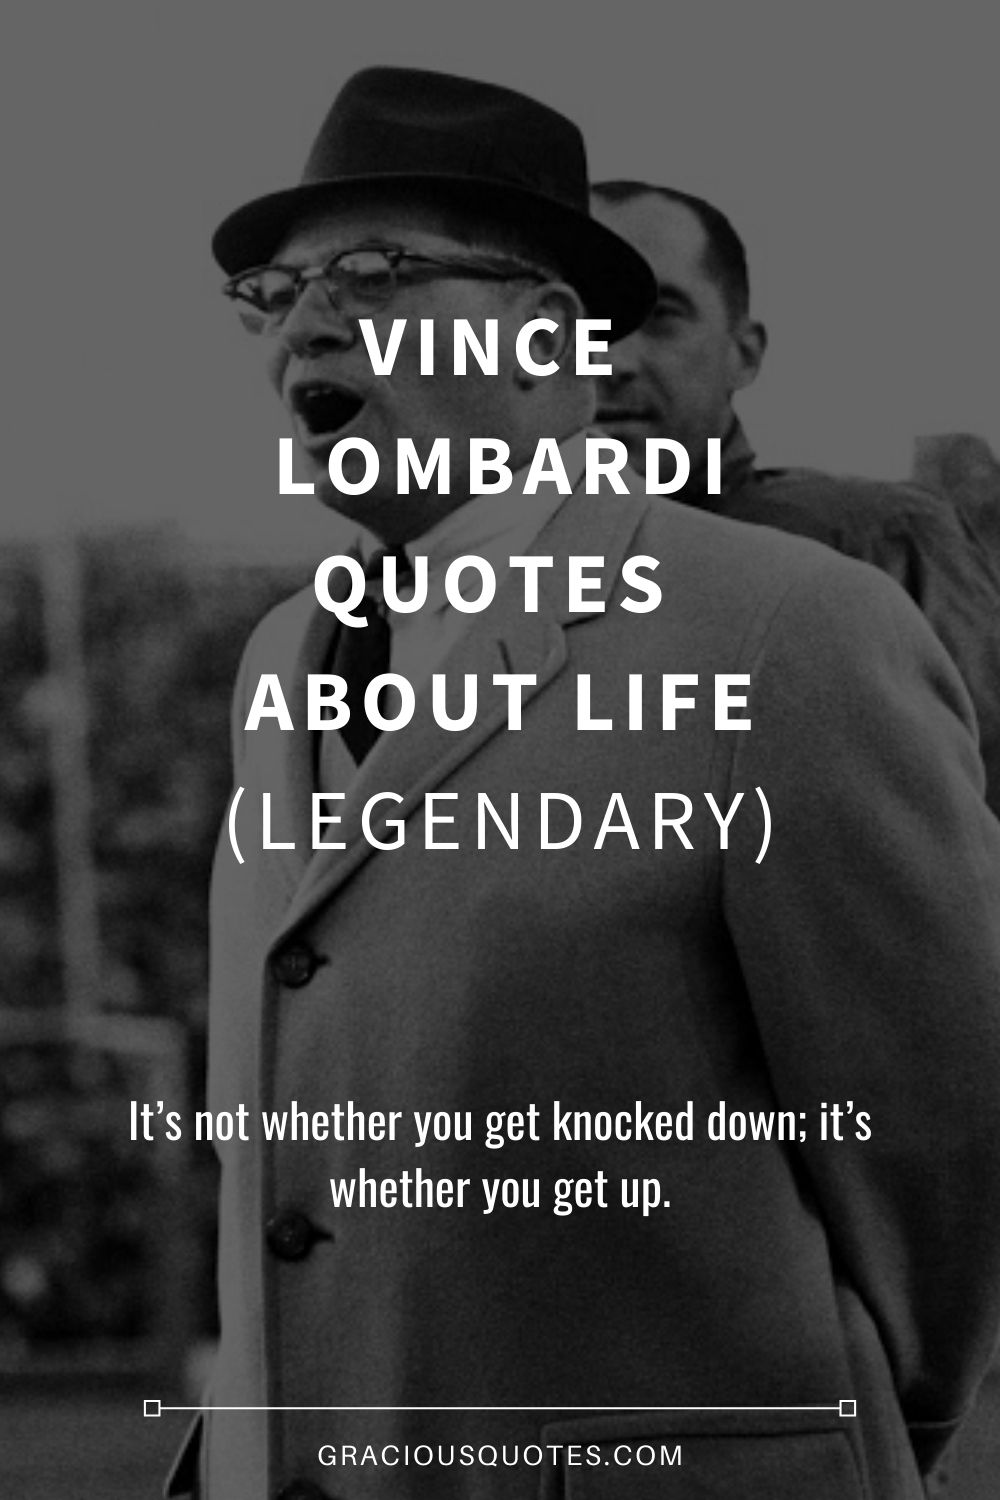 Vince Lombardi Quotes About Life (LEGENDARY) - Gracious Quotes